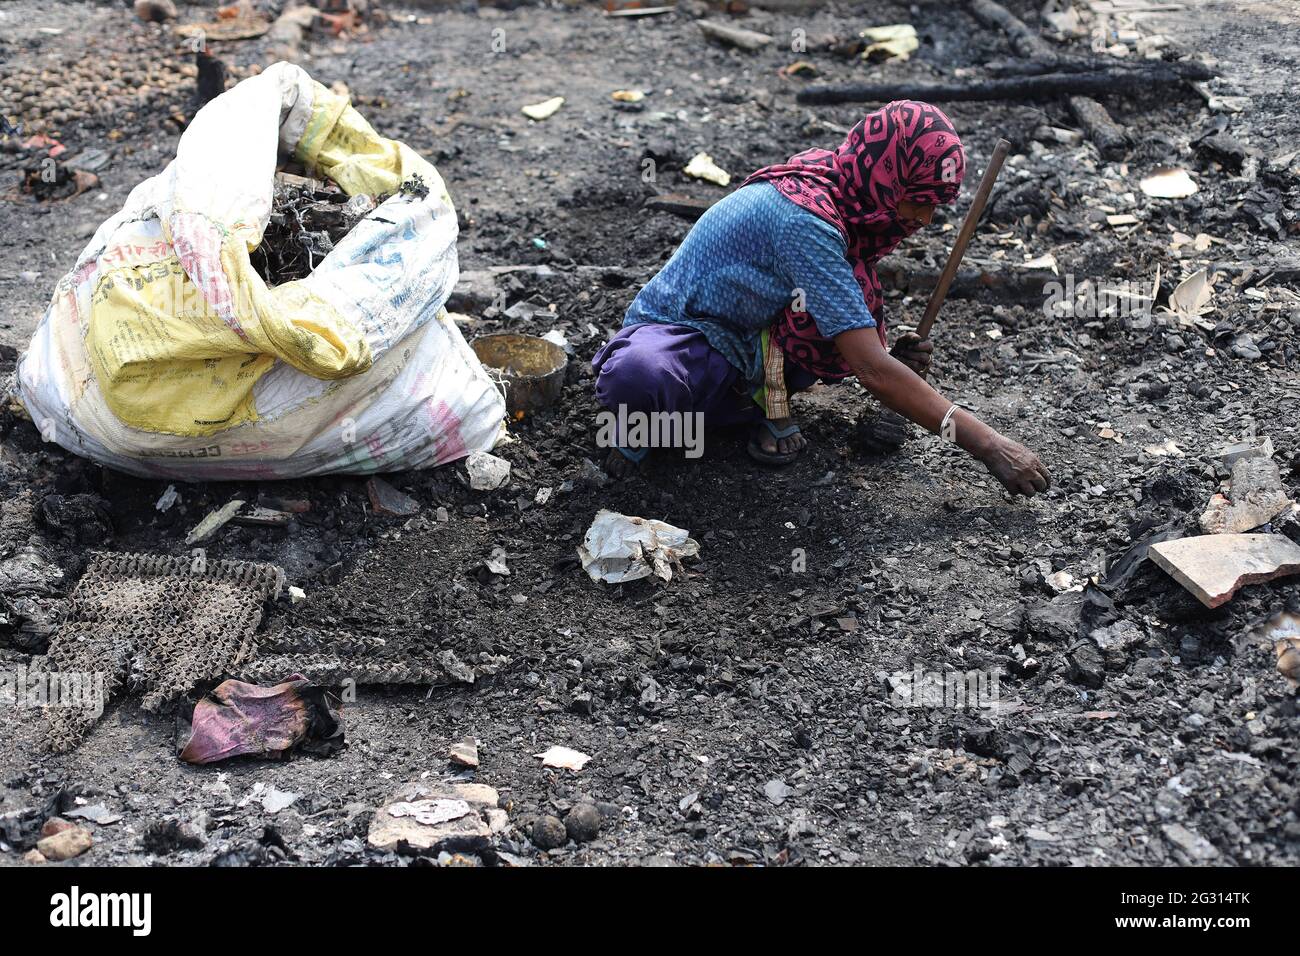 New Delhi, India. 13th June, 2021. A Rohingya refugee looks for her belongings amid the charred remains of their camp, during the aftermath.A fire incident broke out at the Rohingya refugee camp leaving over 50 shanties of Rohingya refugees gutted. The cause of the fire has not yet been established. Credit: SOPA Images Limited/Alamy Live News Stock Photo